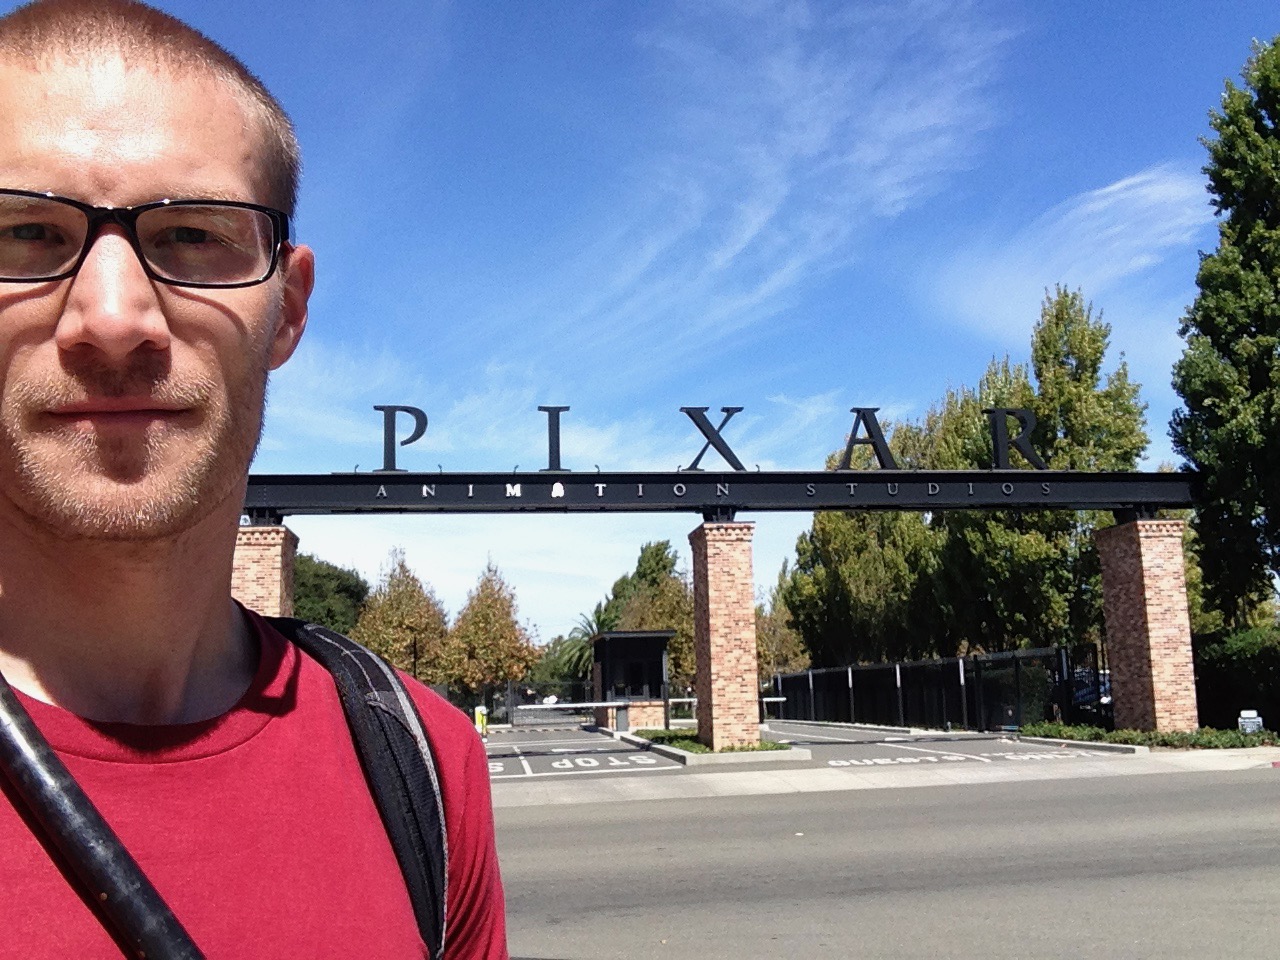 The closest you can get to the Pixar HQ in Emeryville